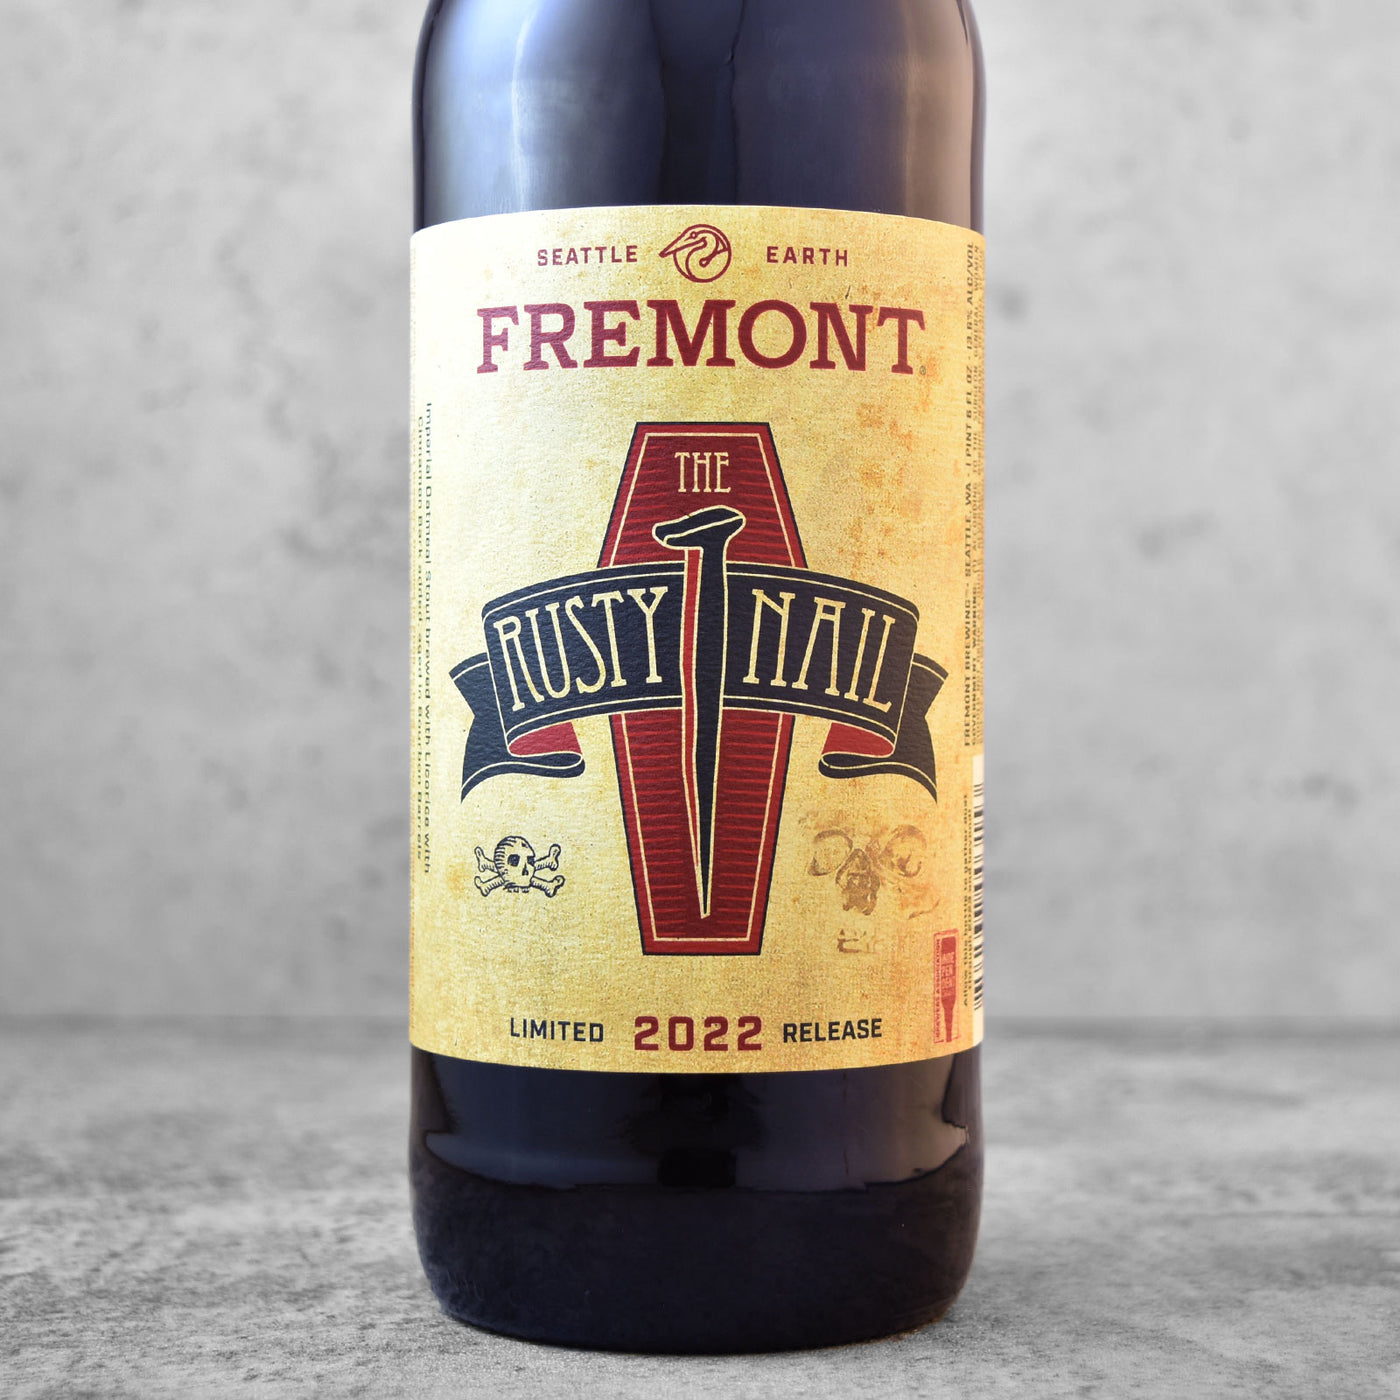 Fremont Rusty Nail 2022